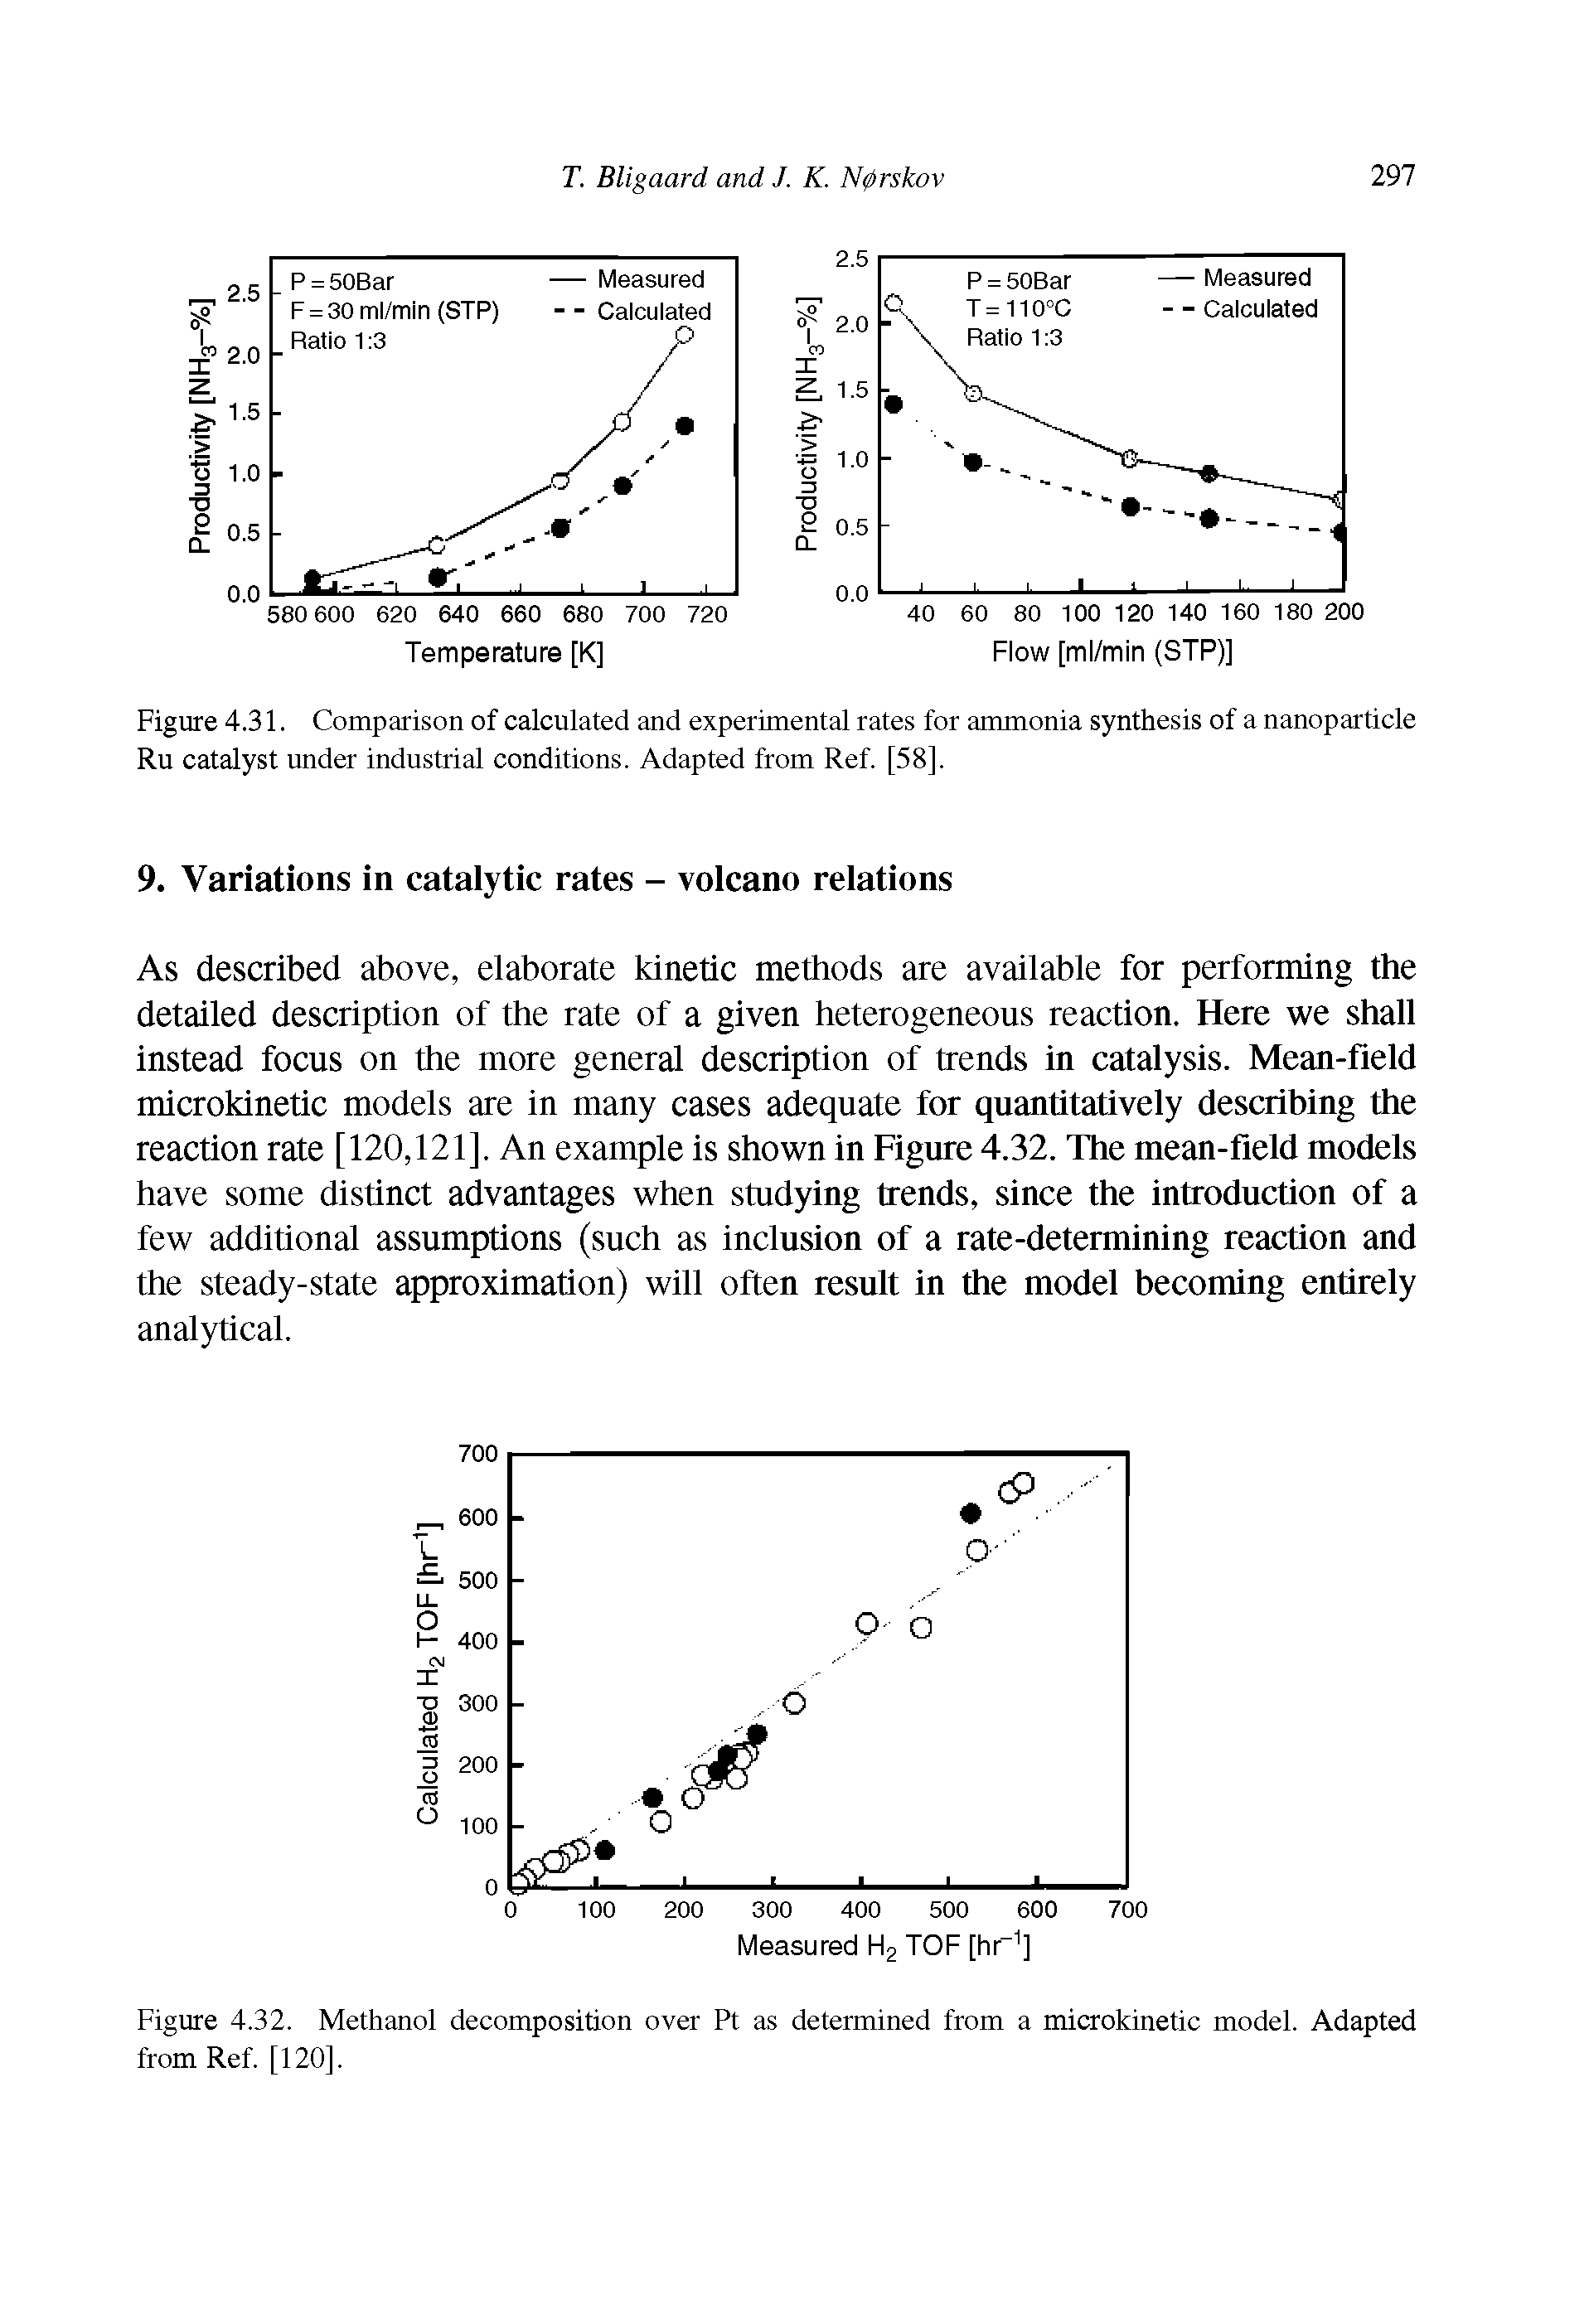 Figure 4.31. Comparison of calculated and experimental rates for ammonia synthesis of a nanoparticle Ru catalyst under industrial conditions. Adapted from Ref. [58].